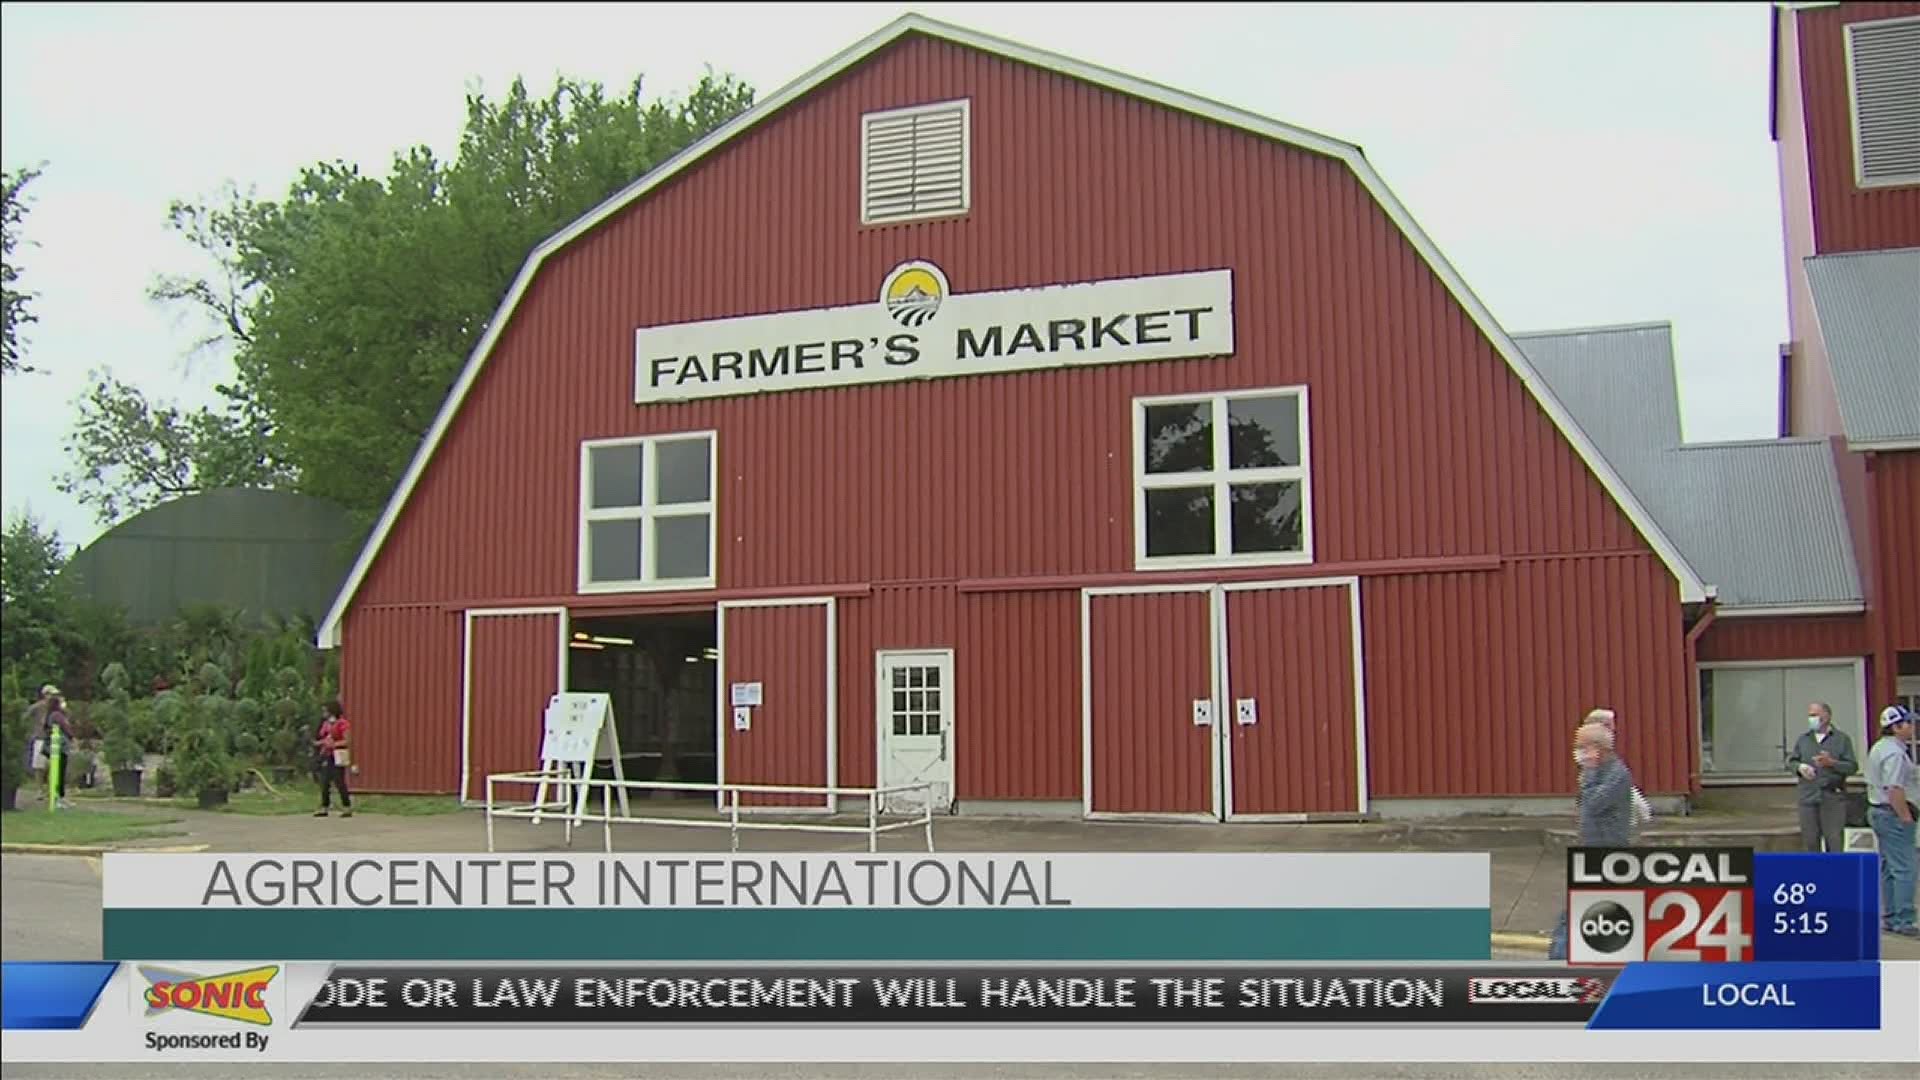 Agricenter Farmer's Market to reopen Tuesday with limited hours during